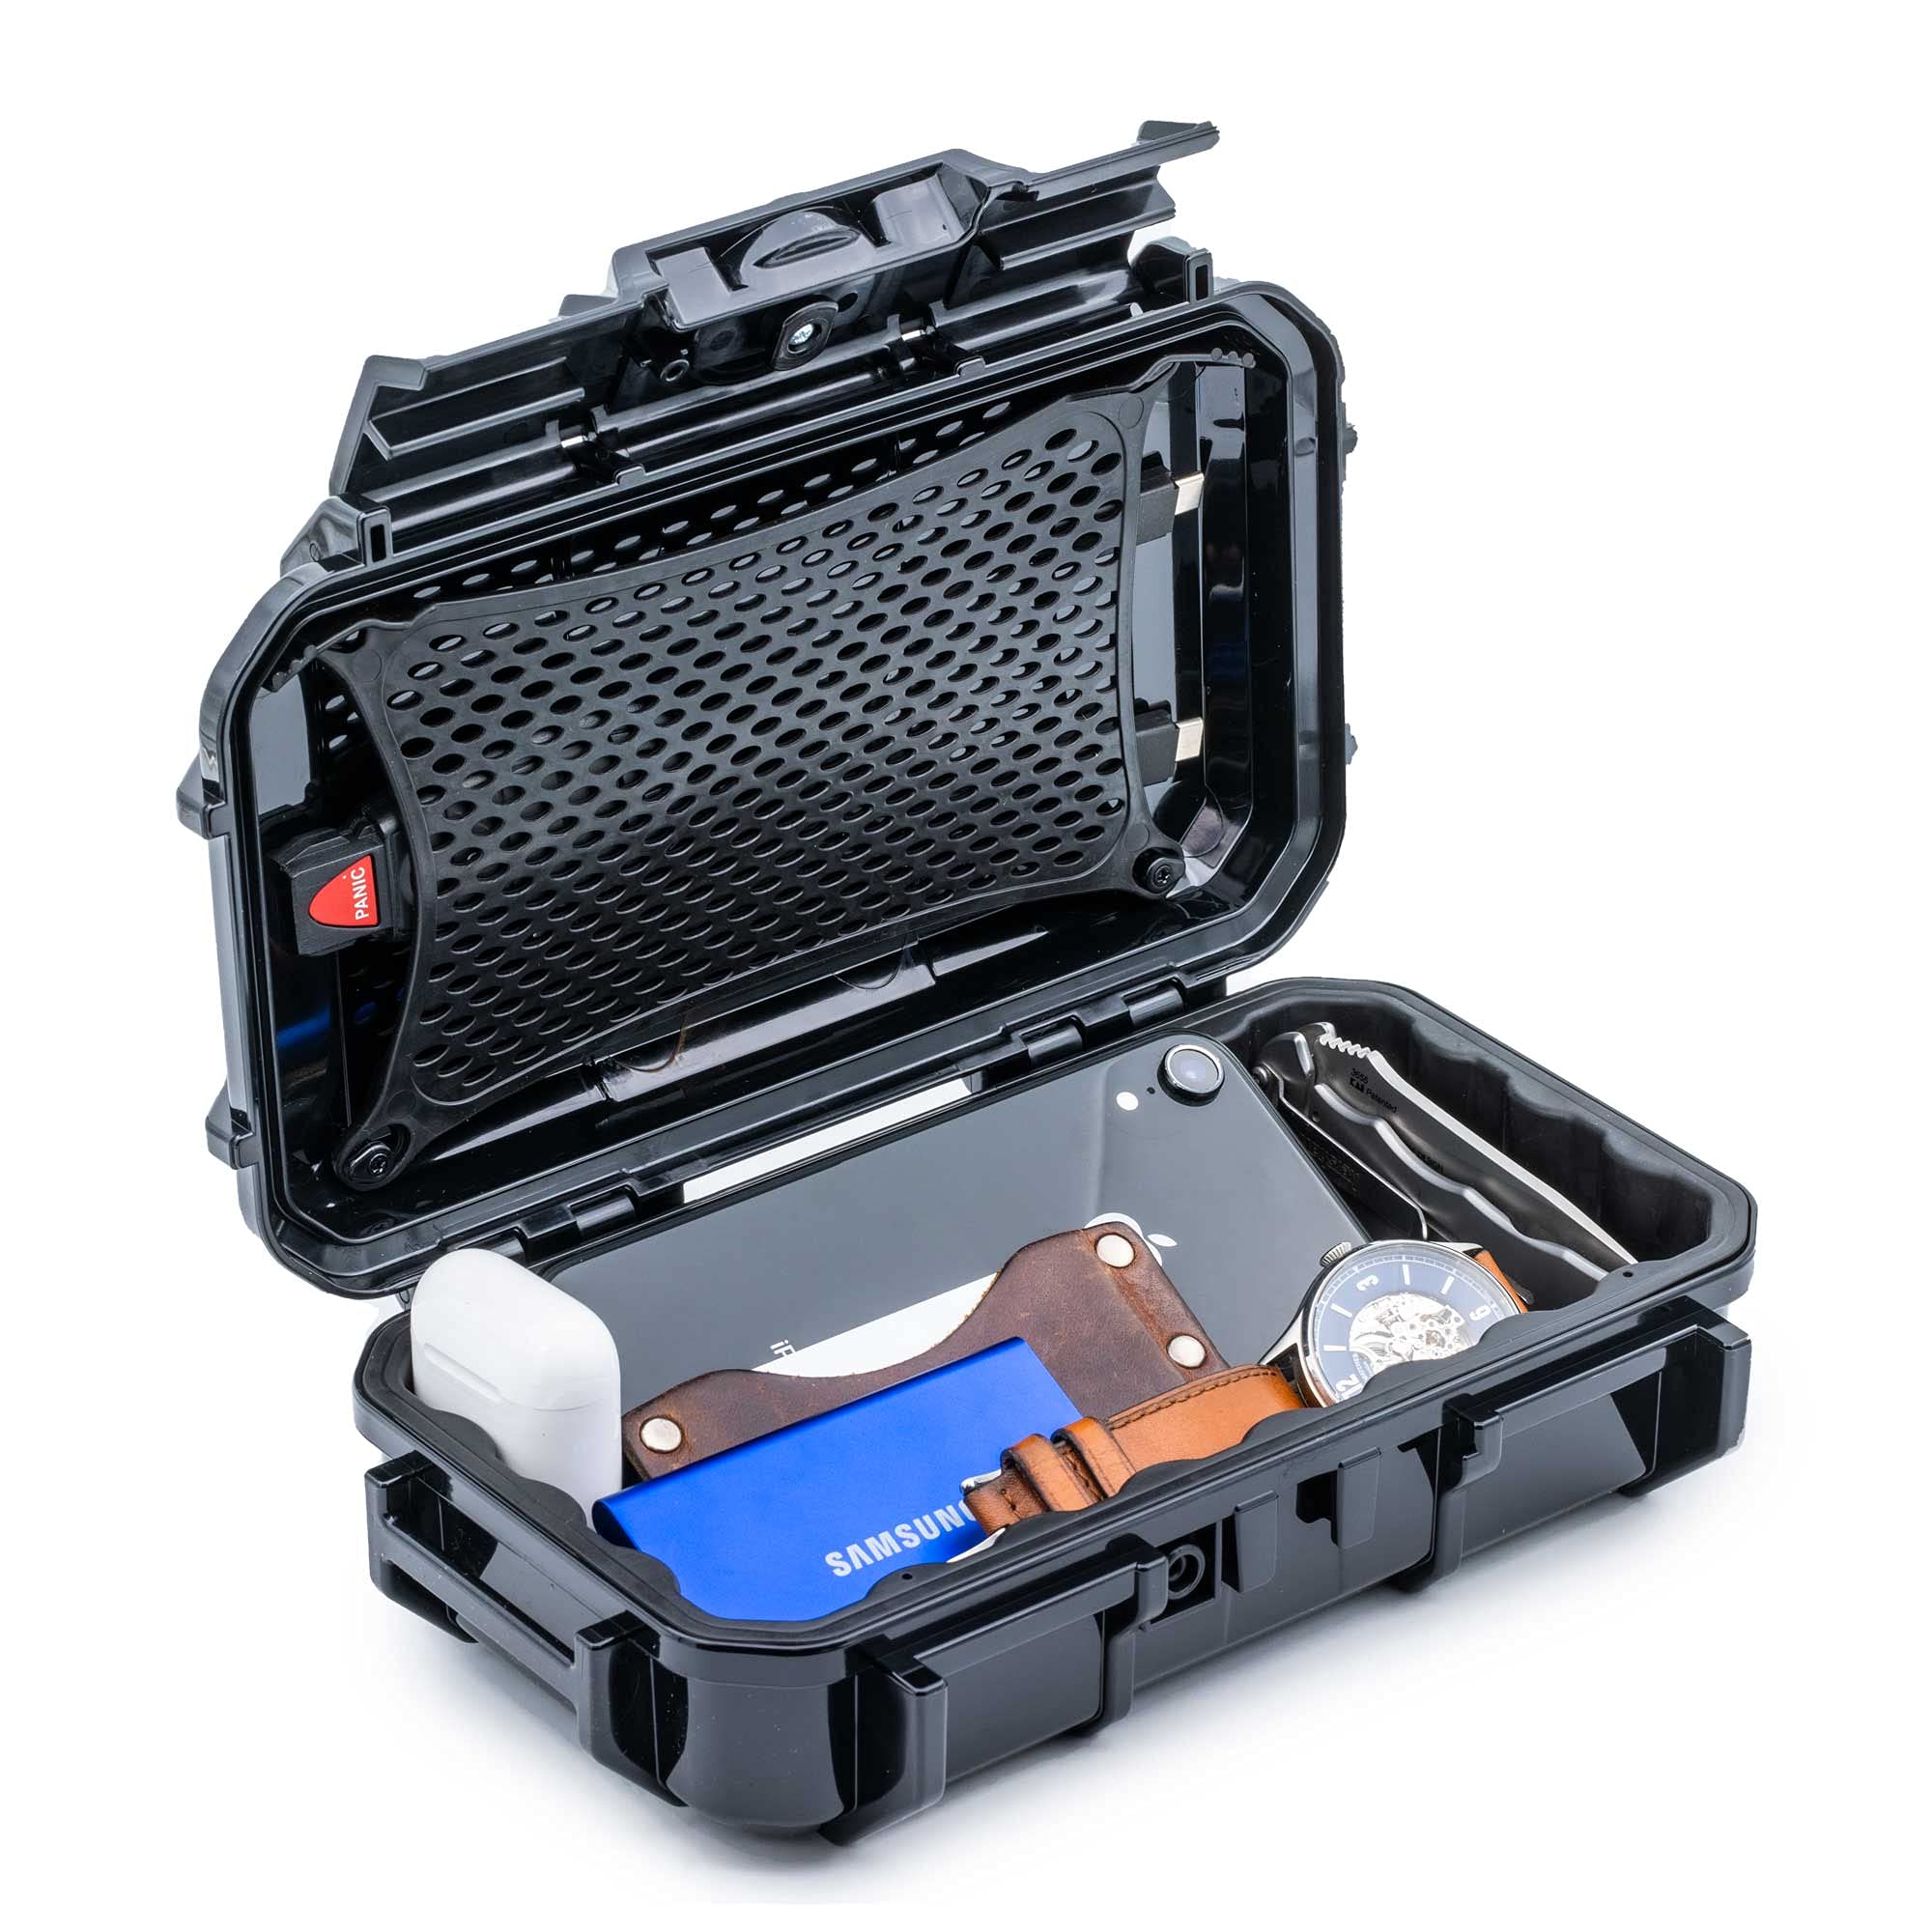 Evergreen 56 Waterproof Dry Box Protective Case - Travel Safe/Mil Spec/USA  Made - for Tackle Organization of Cameras, Phones, Camping, Fishing,  Hiking, EDC, Water Sports, Knives (Black)